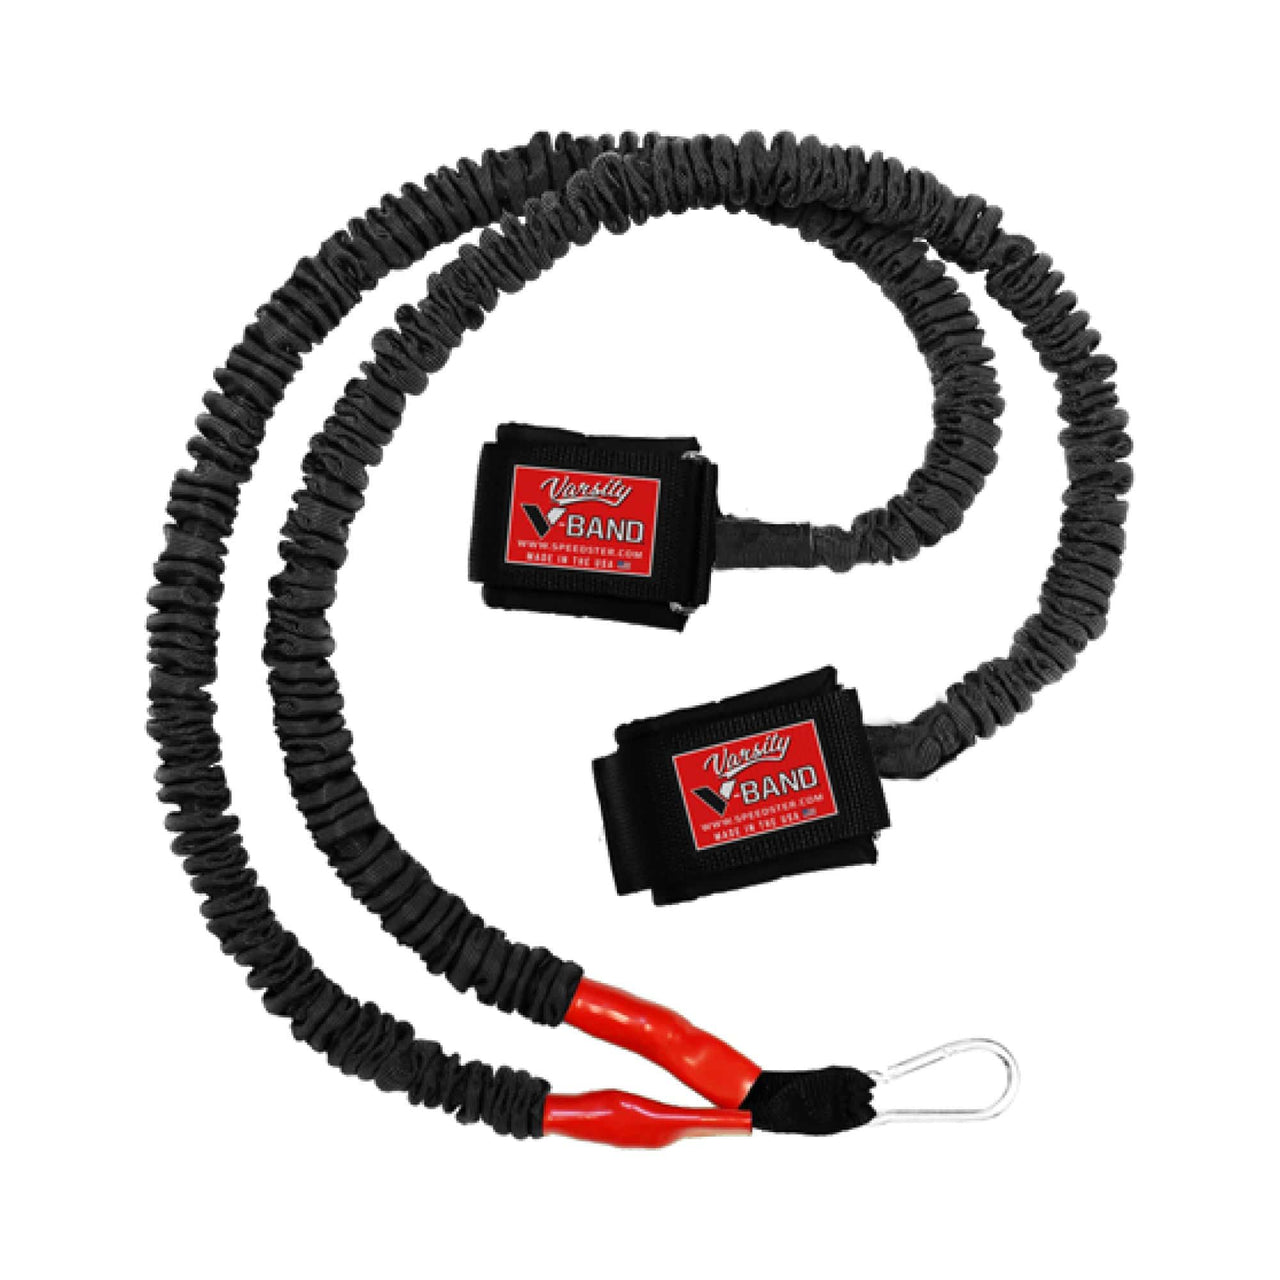 Baseball Resistance Bands for warm up. Compare to j-band Covered for safety jaeger band that is covered to be anti snap and avoid injury from arm care on the field, warm up shoulder bands that will last longer because they are protected from elements on the field